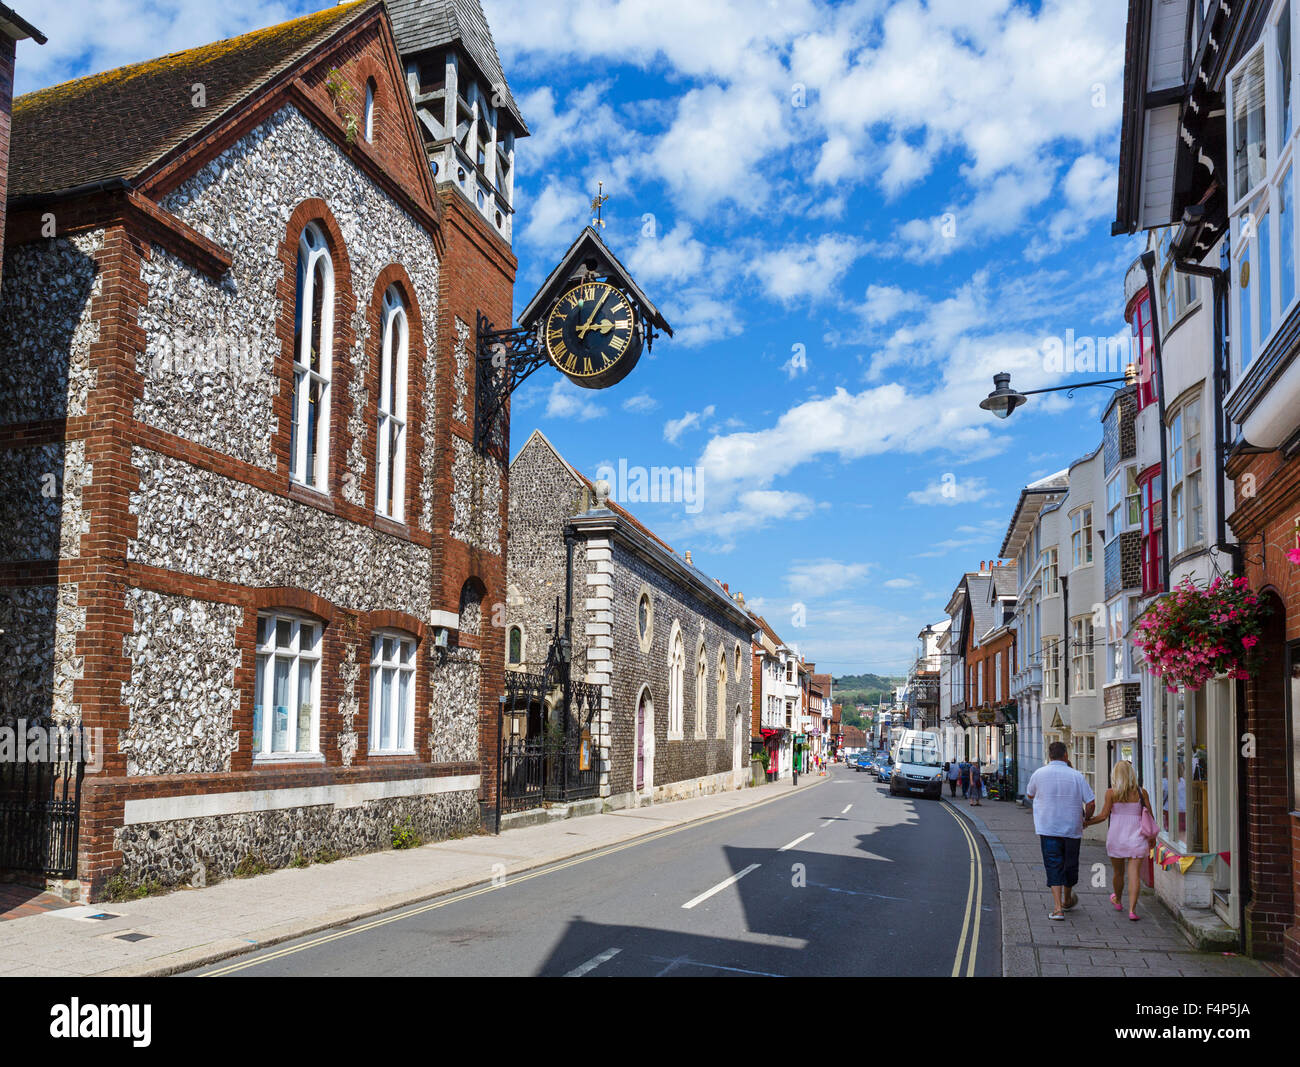 The High Street, Lewes, East Sussex England, UK Stock Photo